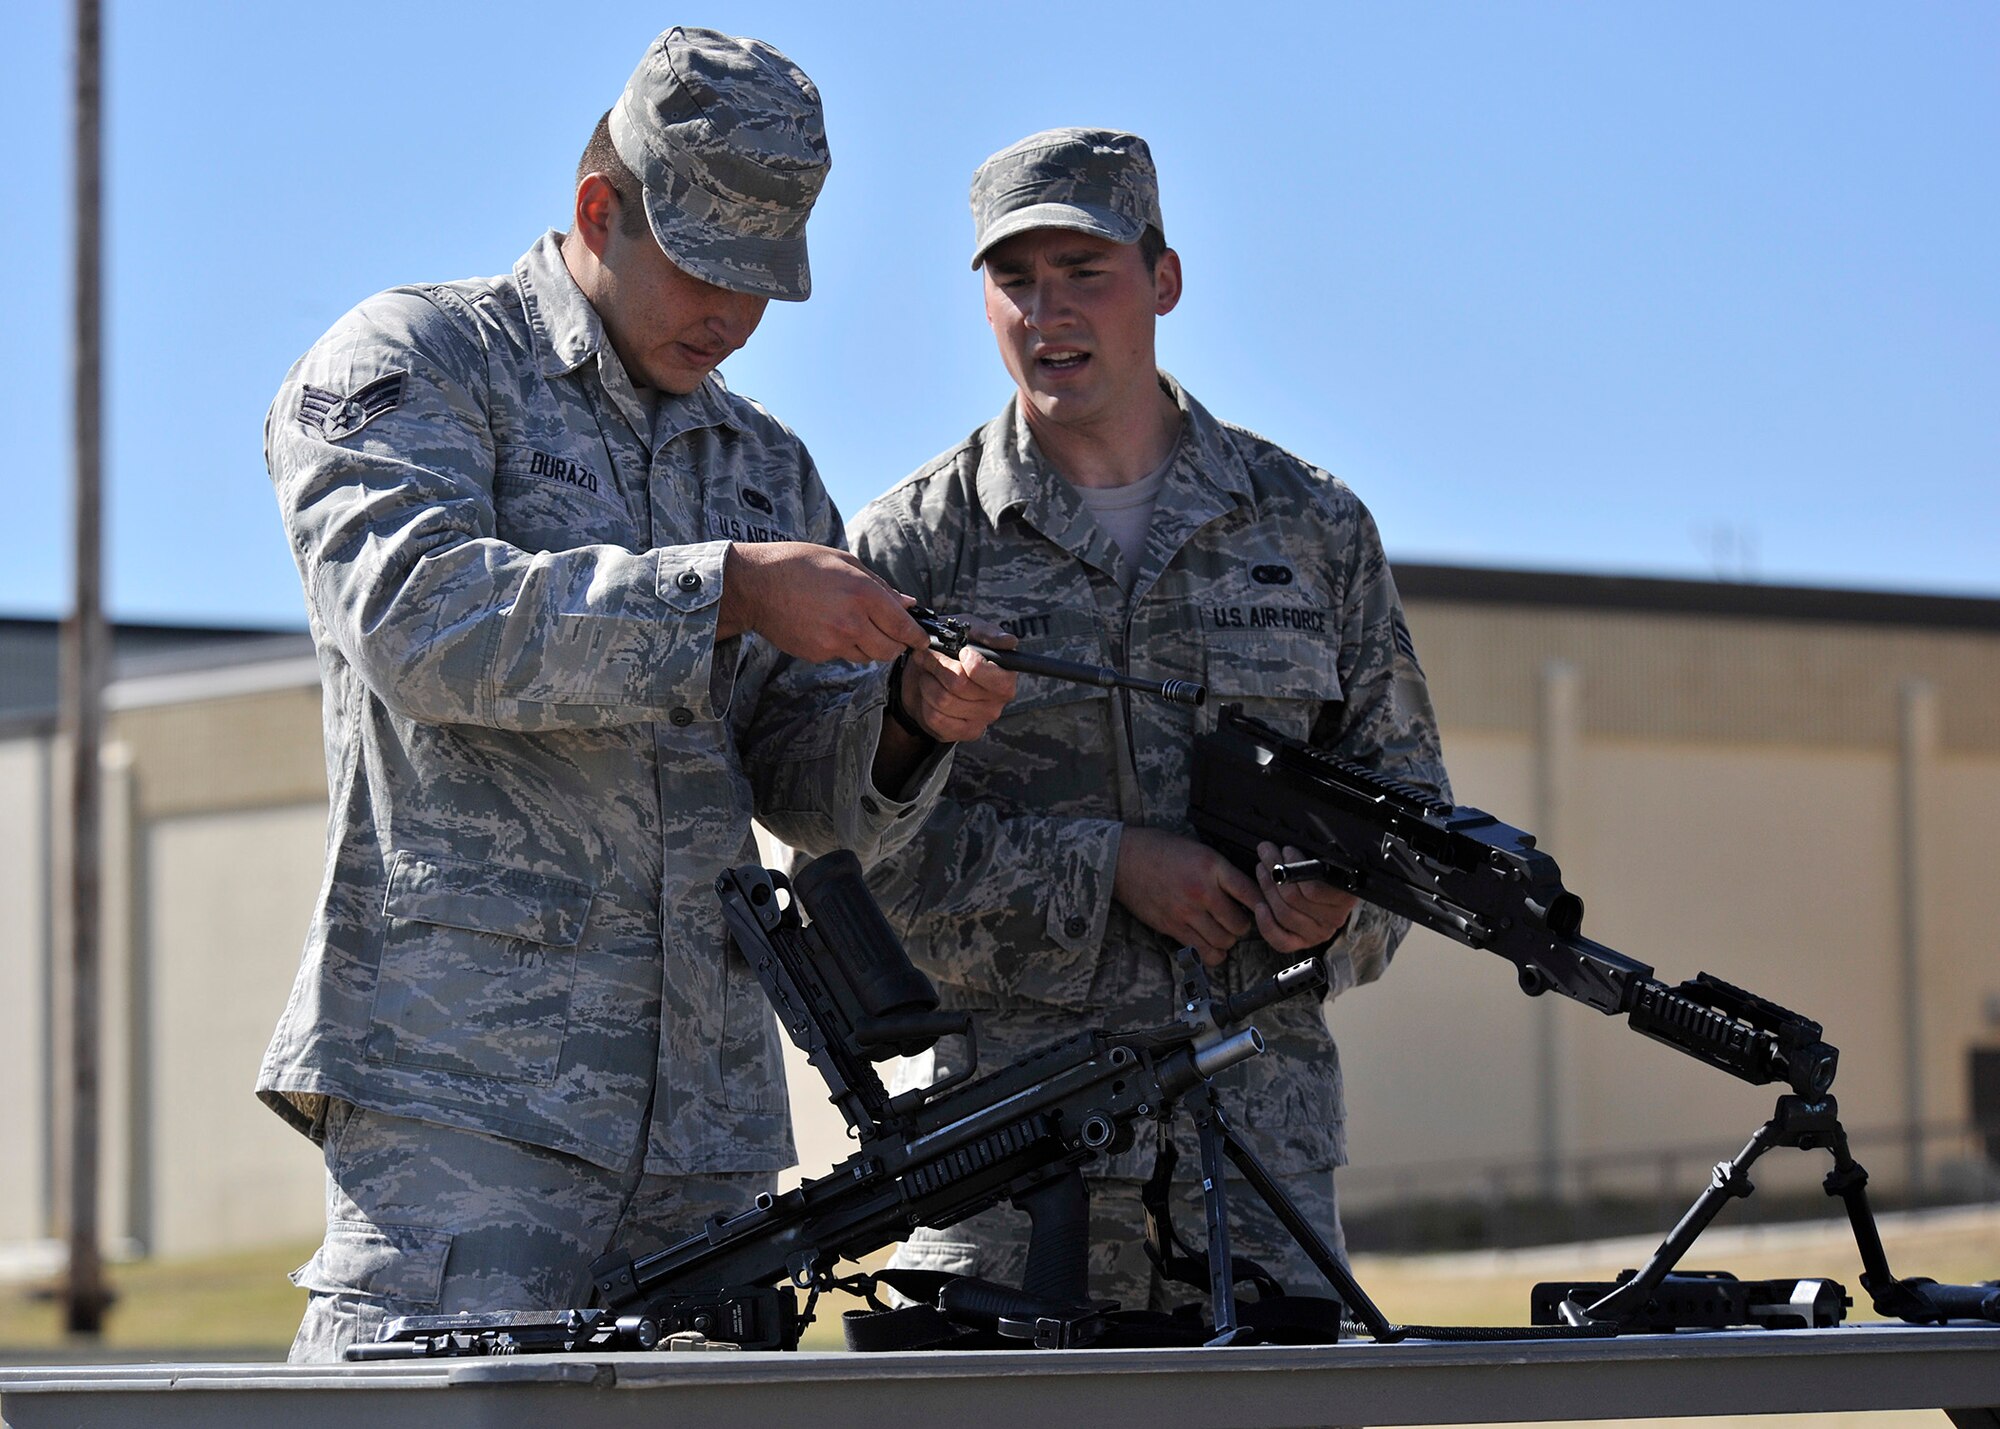 Senior Airmen Robert Durazo, left, and Daniel Orcutt, both 741st Missile Security Forces Squadron tactical response force members, work together to quickly assemble five weapons July 29 during tryouts for Malmstrom’s Global Strike Challenge 2015 security forces team. The tryouts were July 27-30 at the fitness center’s track and field and were open to all members of the 341st Security Forces Group.  (U.S. Air Force photo/John Turner)